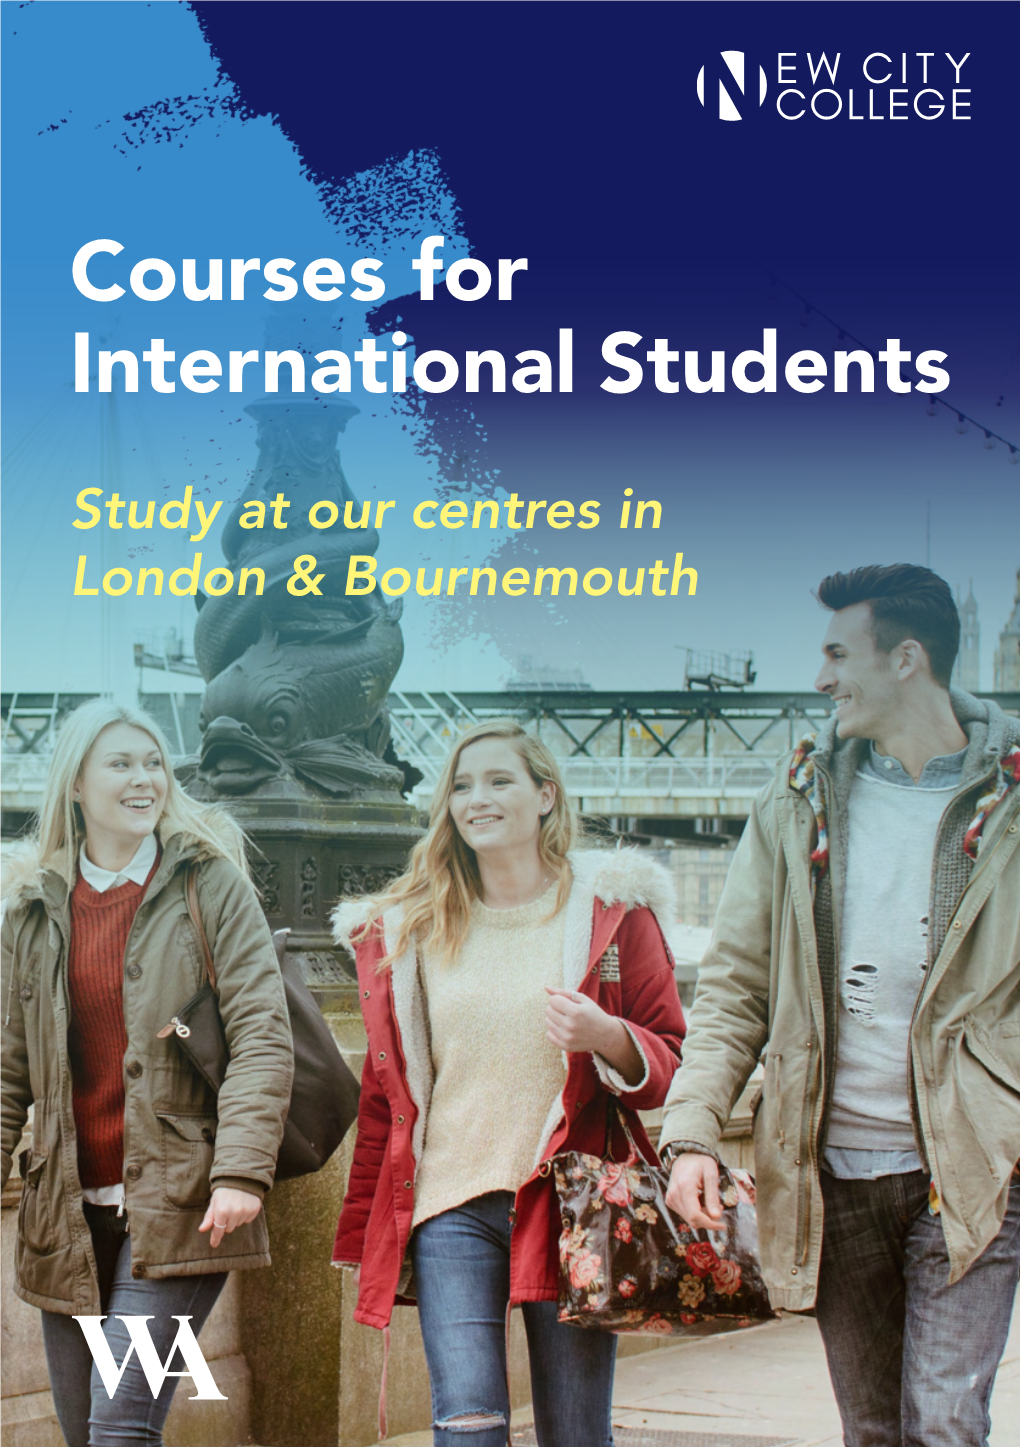 Courses for International Students